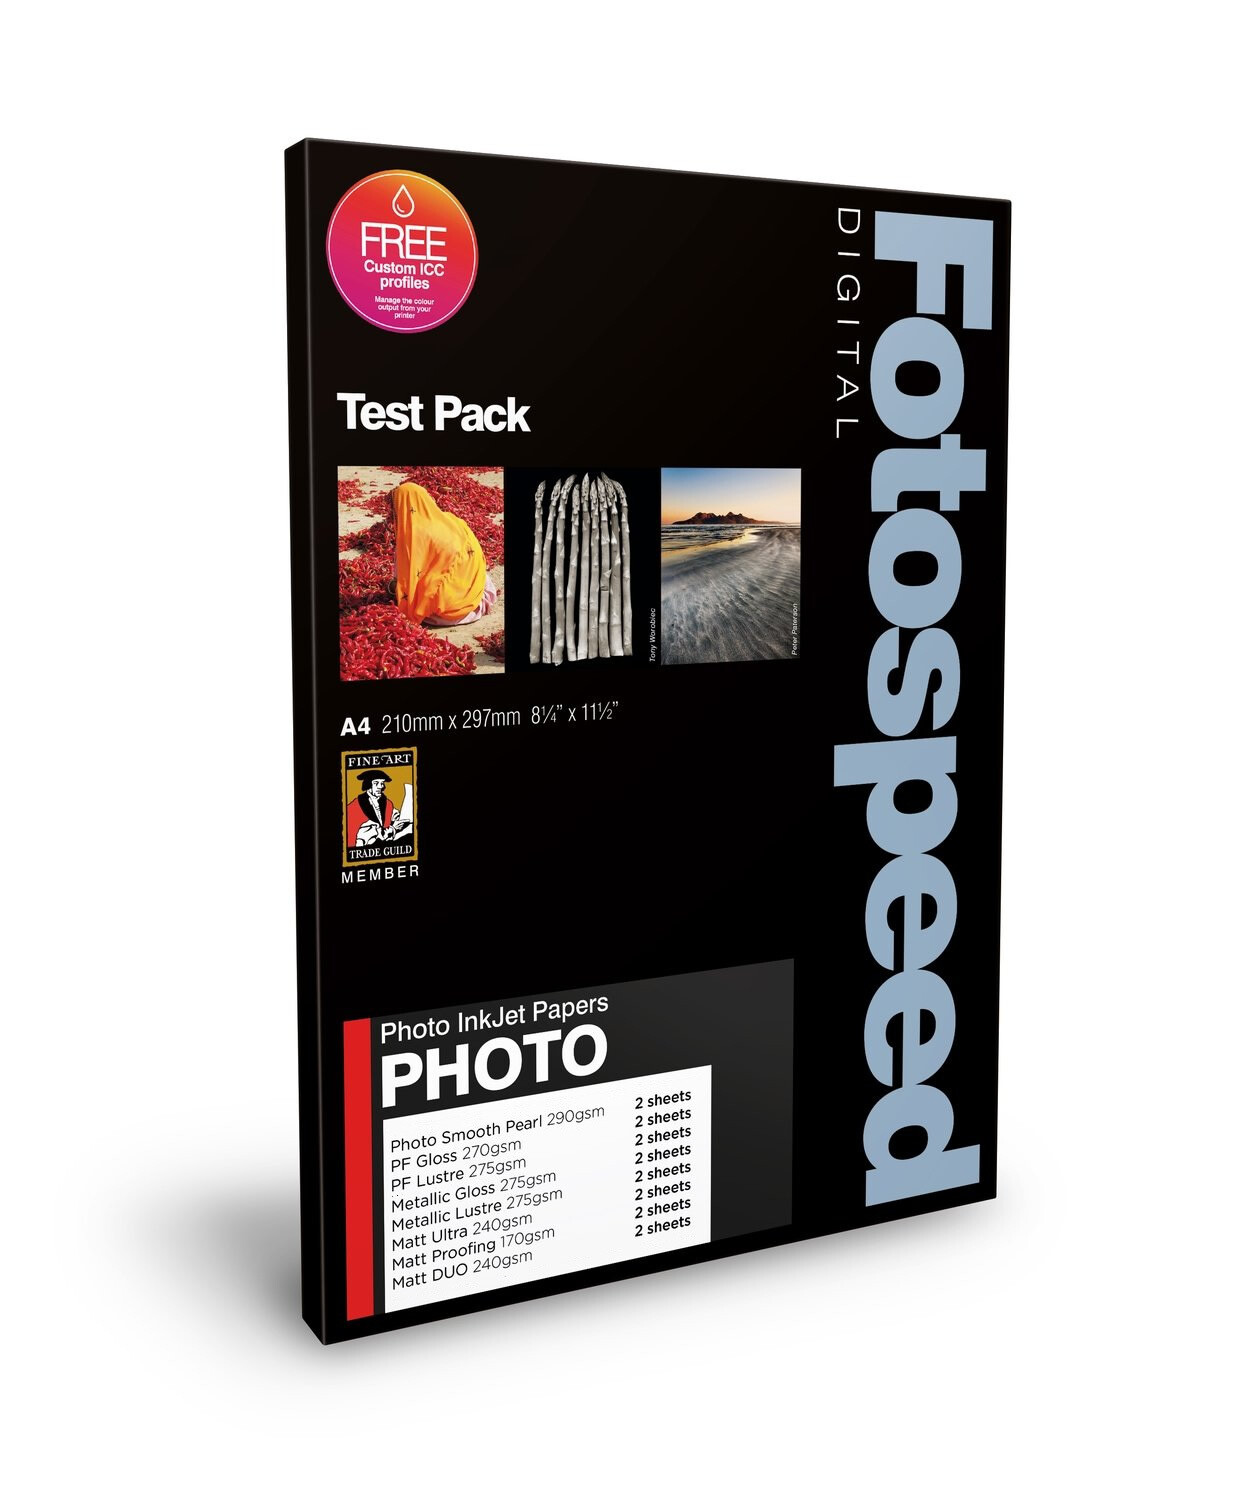 Fotospeed Photo Quality Test Pack (A4, 16 sheets) - 7D130